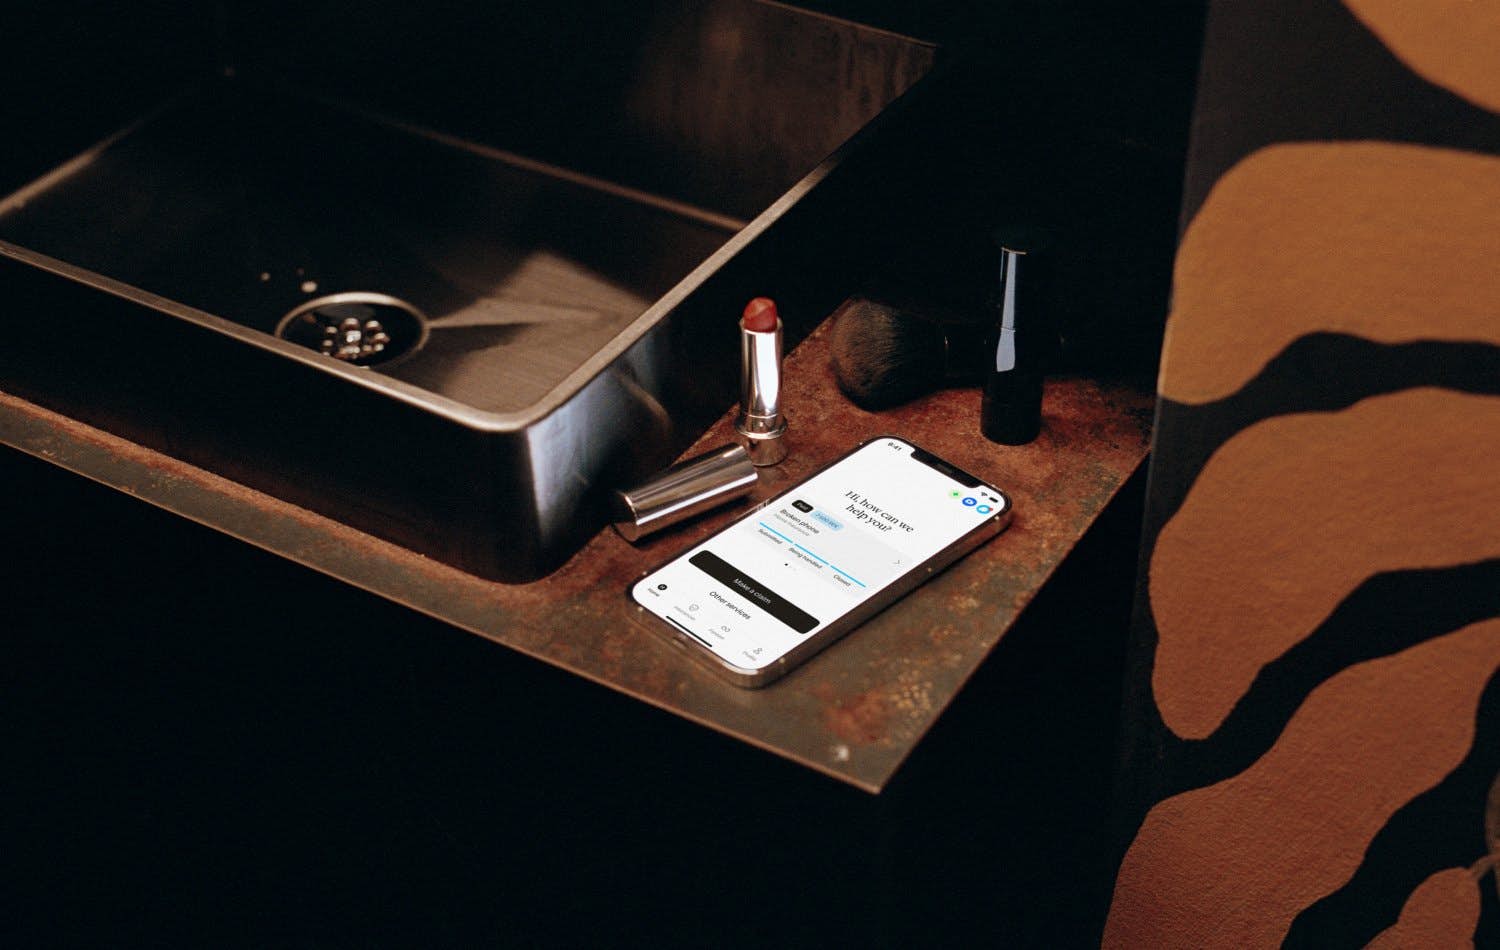 Phone by the bathroom sink next to a lipstick.